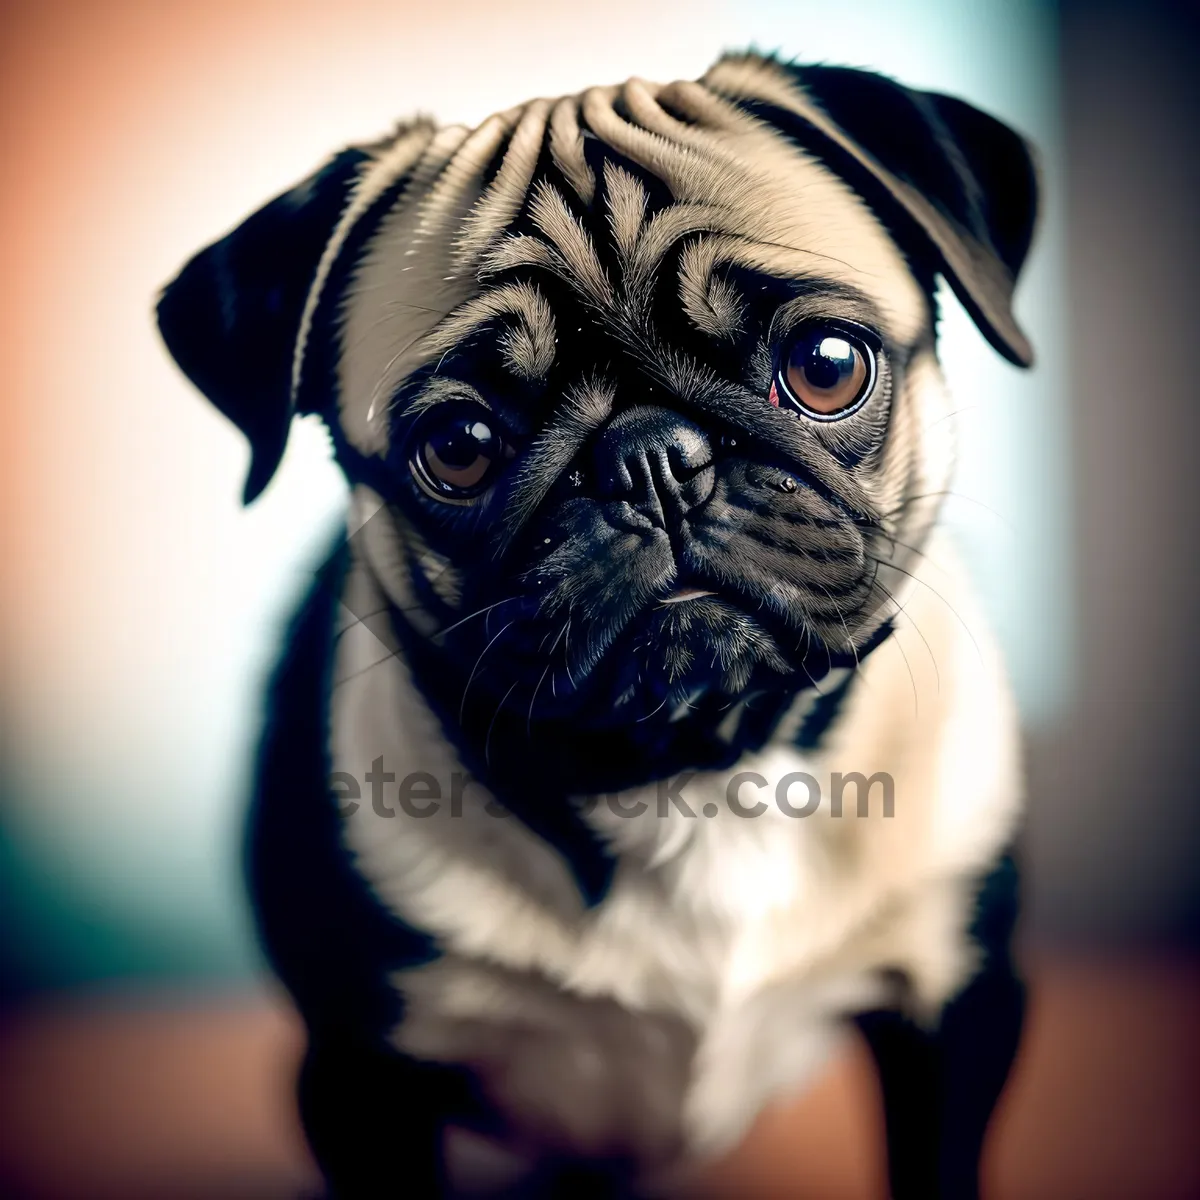 Picture of Cute Pug Puppy - Adorable Bulldog with Wrinkles